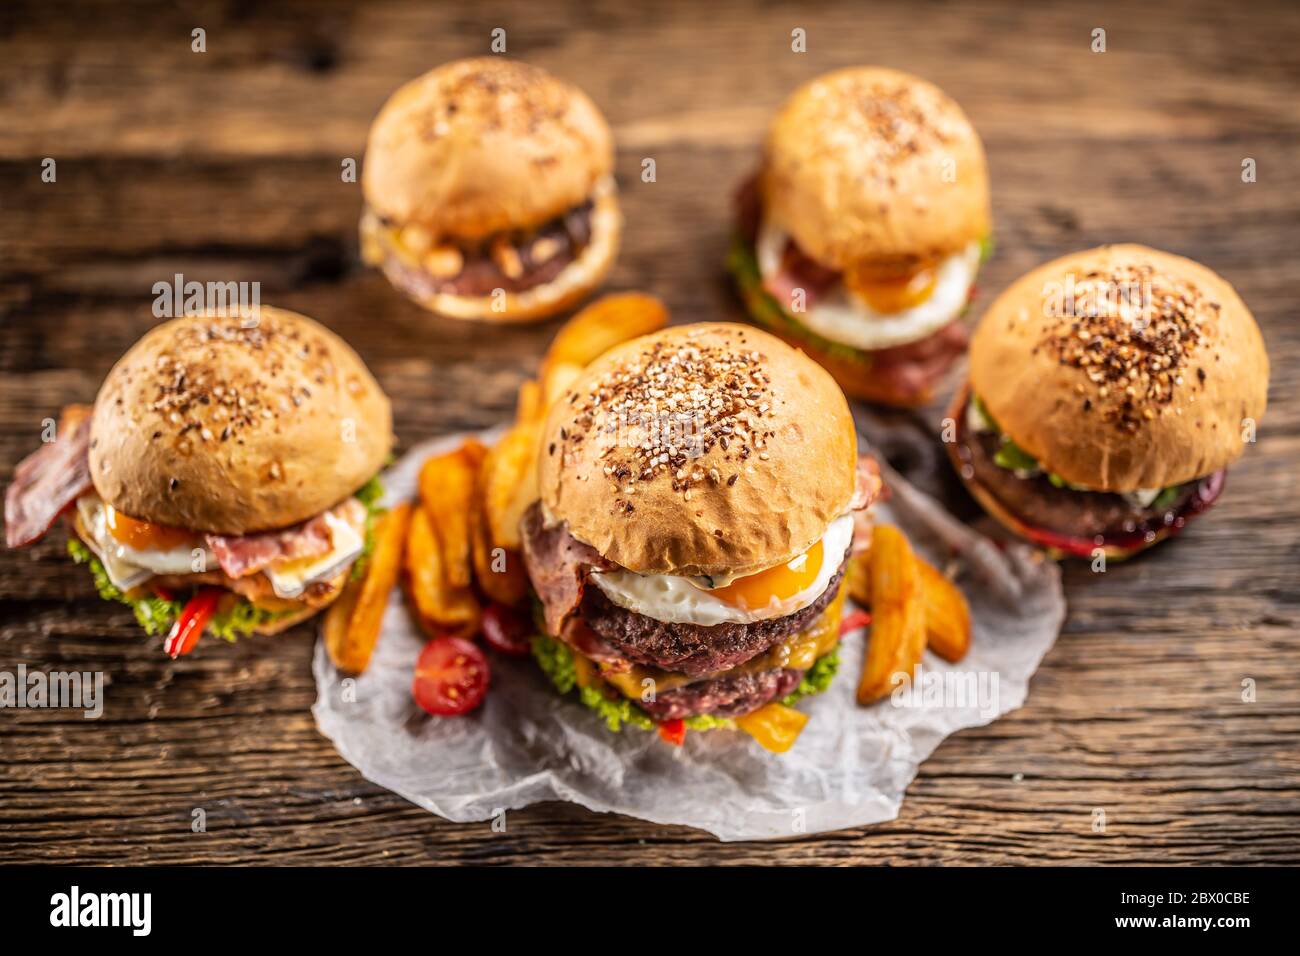 Selection of various fresh tasty burgers in sesame buns with potato wedges in a rustic environment Stock Photo